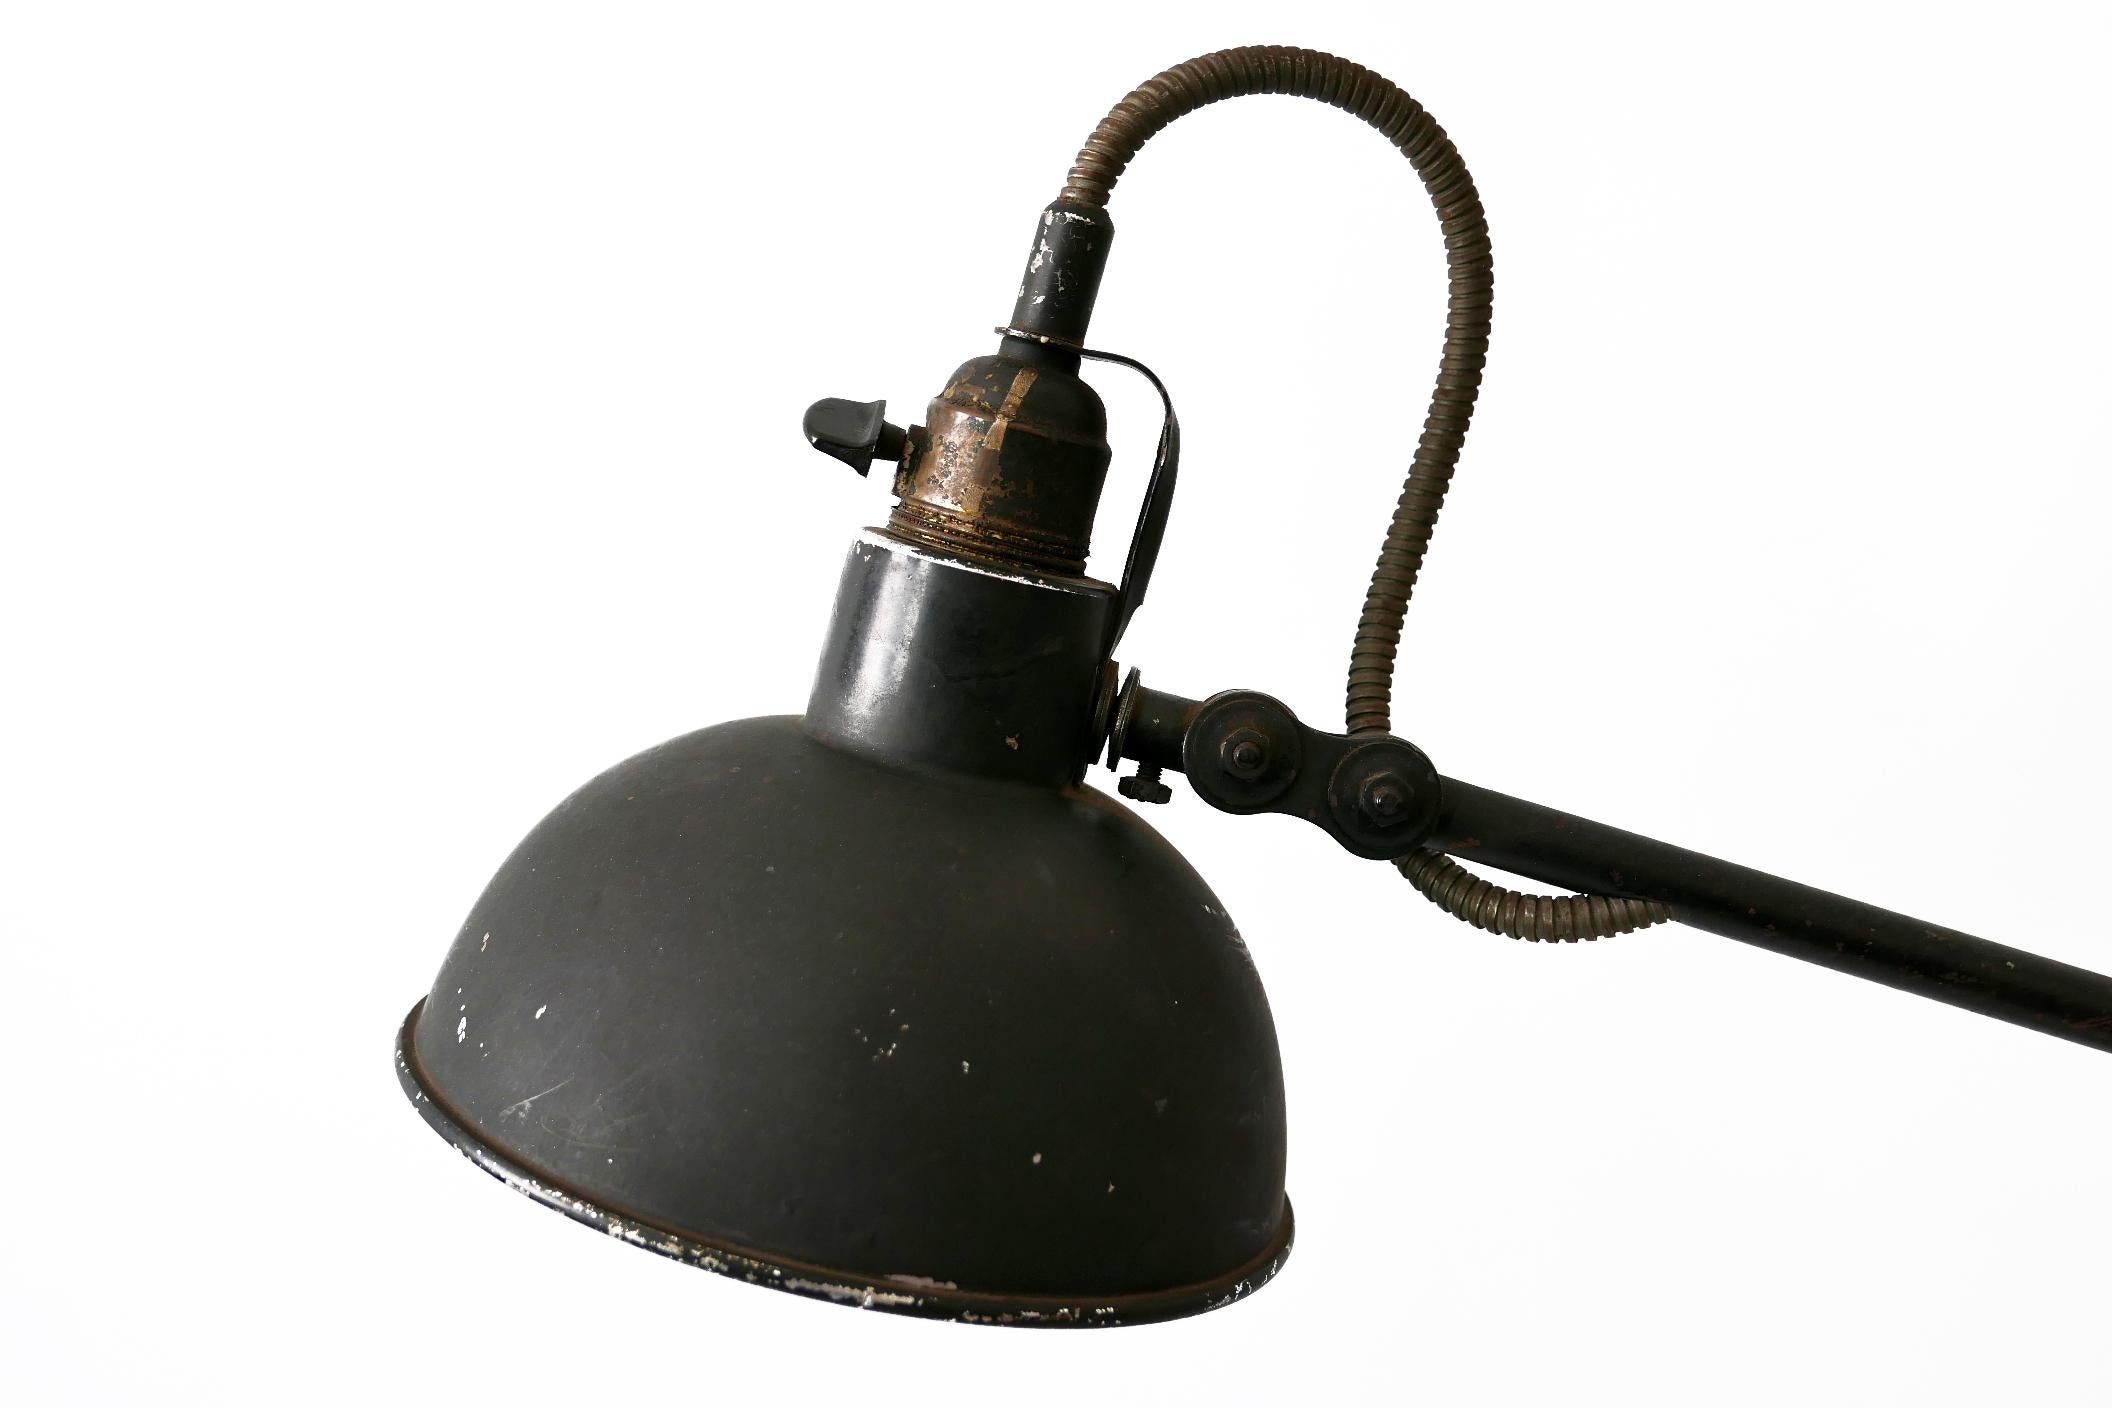 Exceptional Articulated Bauhaus Workshop Wall Lamp or Task Light 1920s Germany For Sale 3